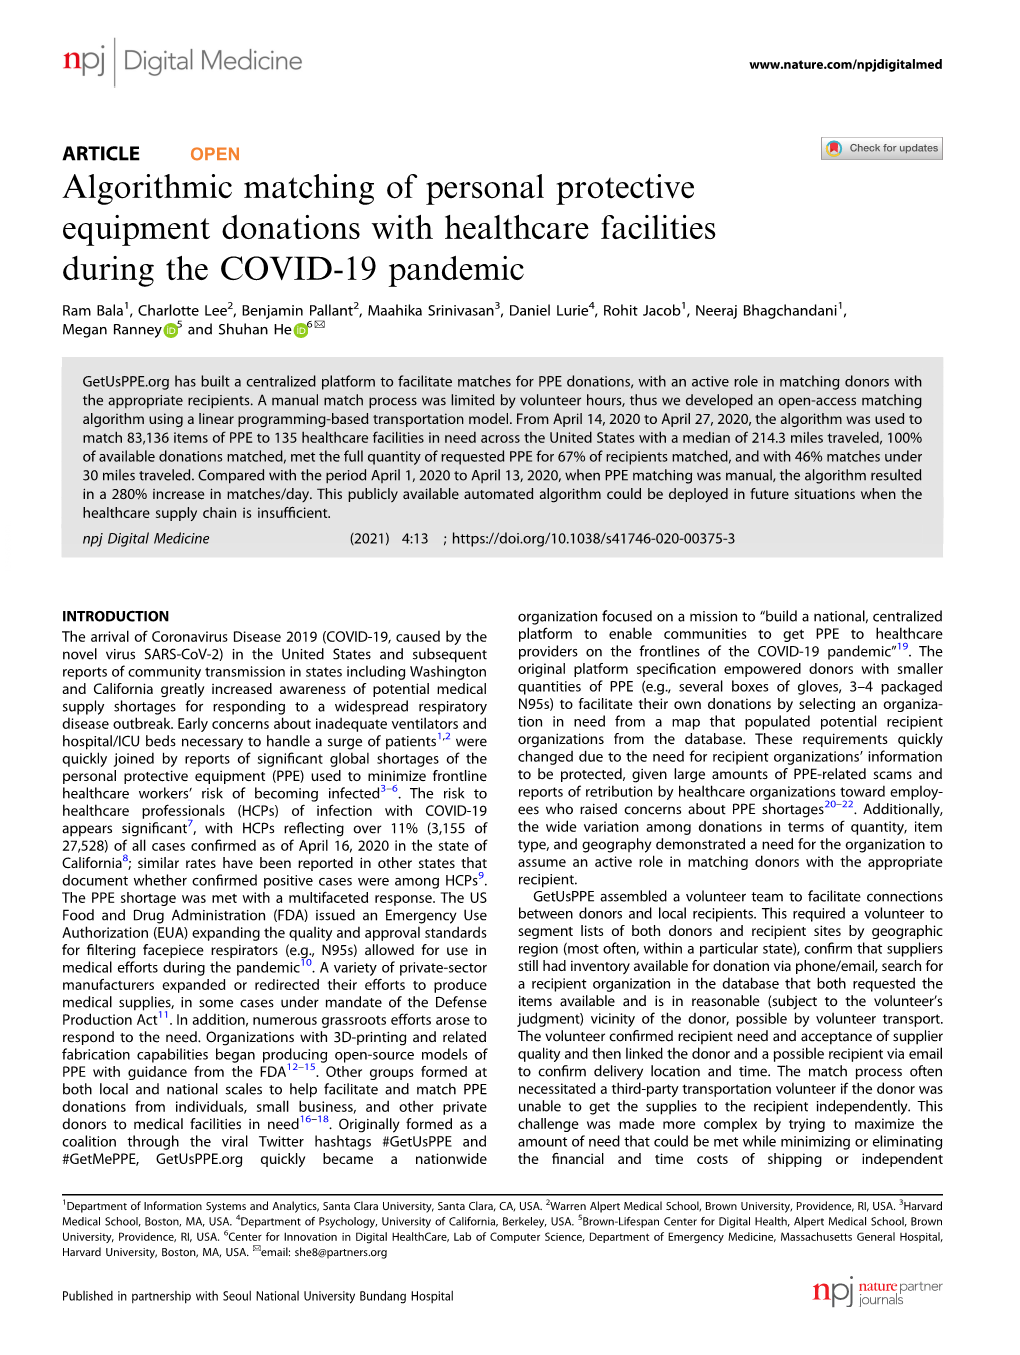 Algorithmic Matching of Personal Protective Equipment Donations with Healthcare Facilities During the COVID-19 Pandemic